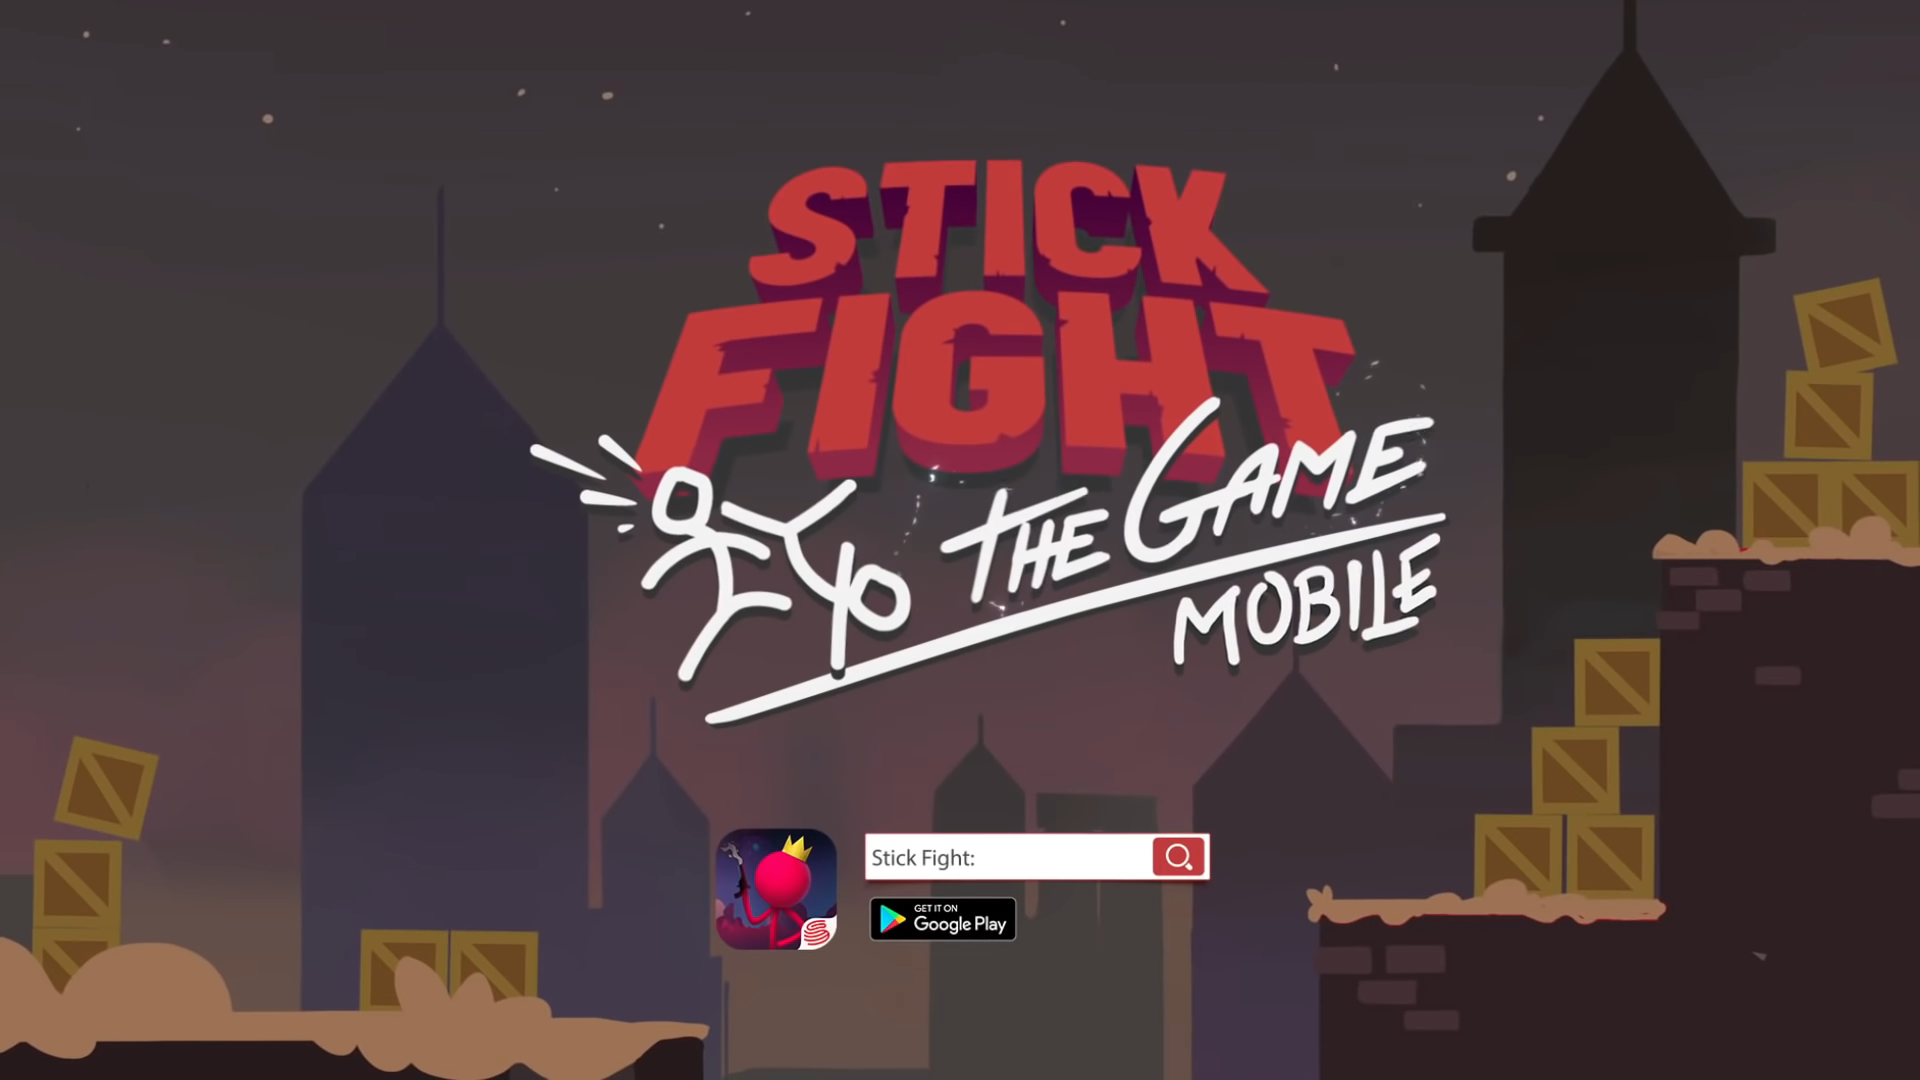 Стик файт. Stick Fight: the game. Stickfightthegame. Stick Fight: the game mobile. Stick fighting игра